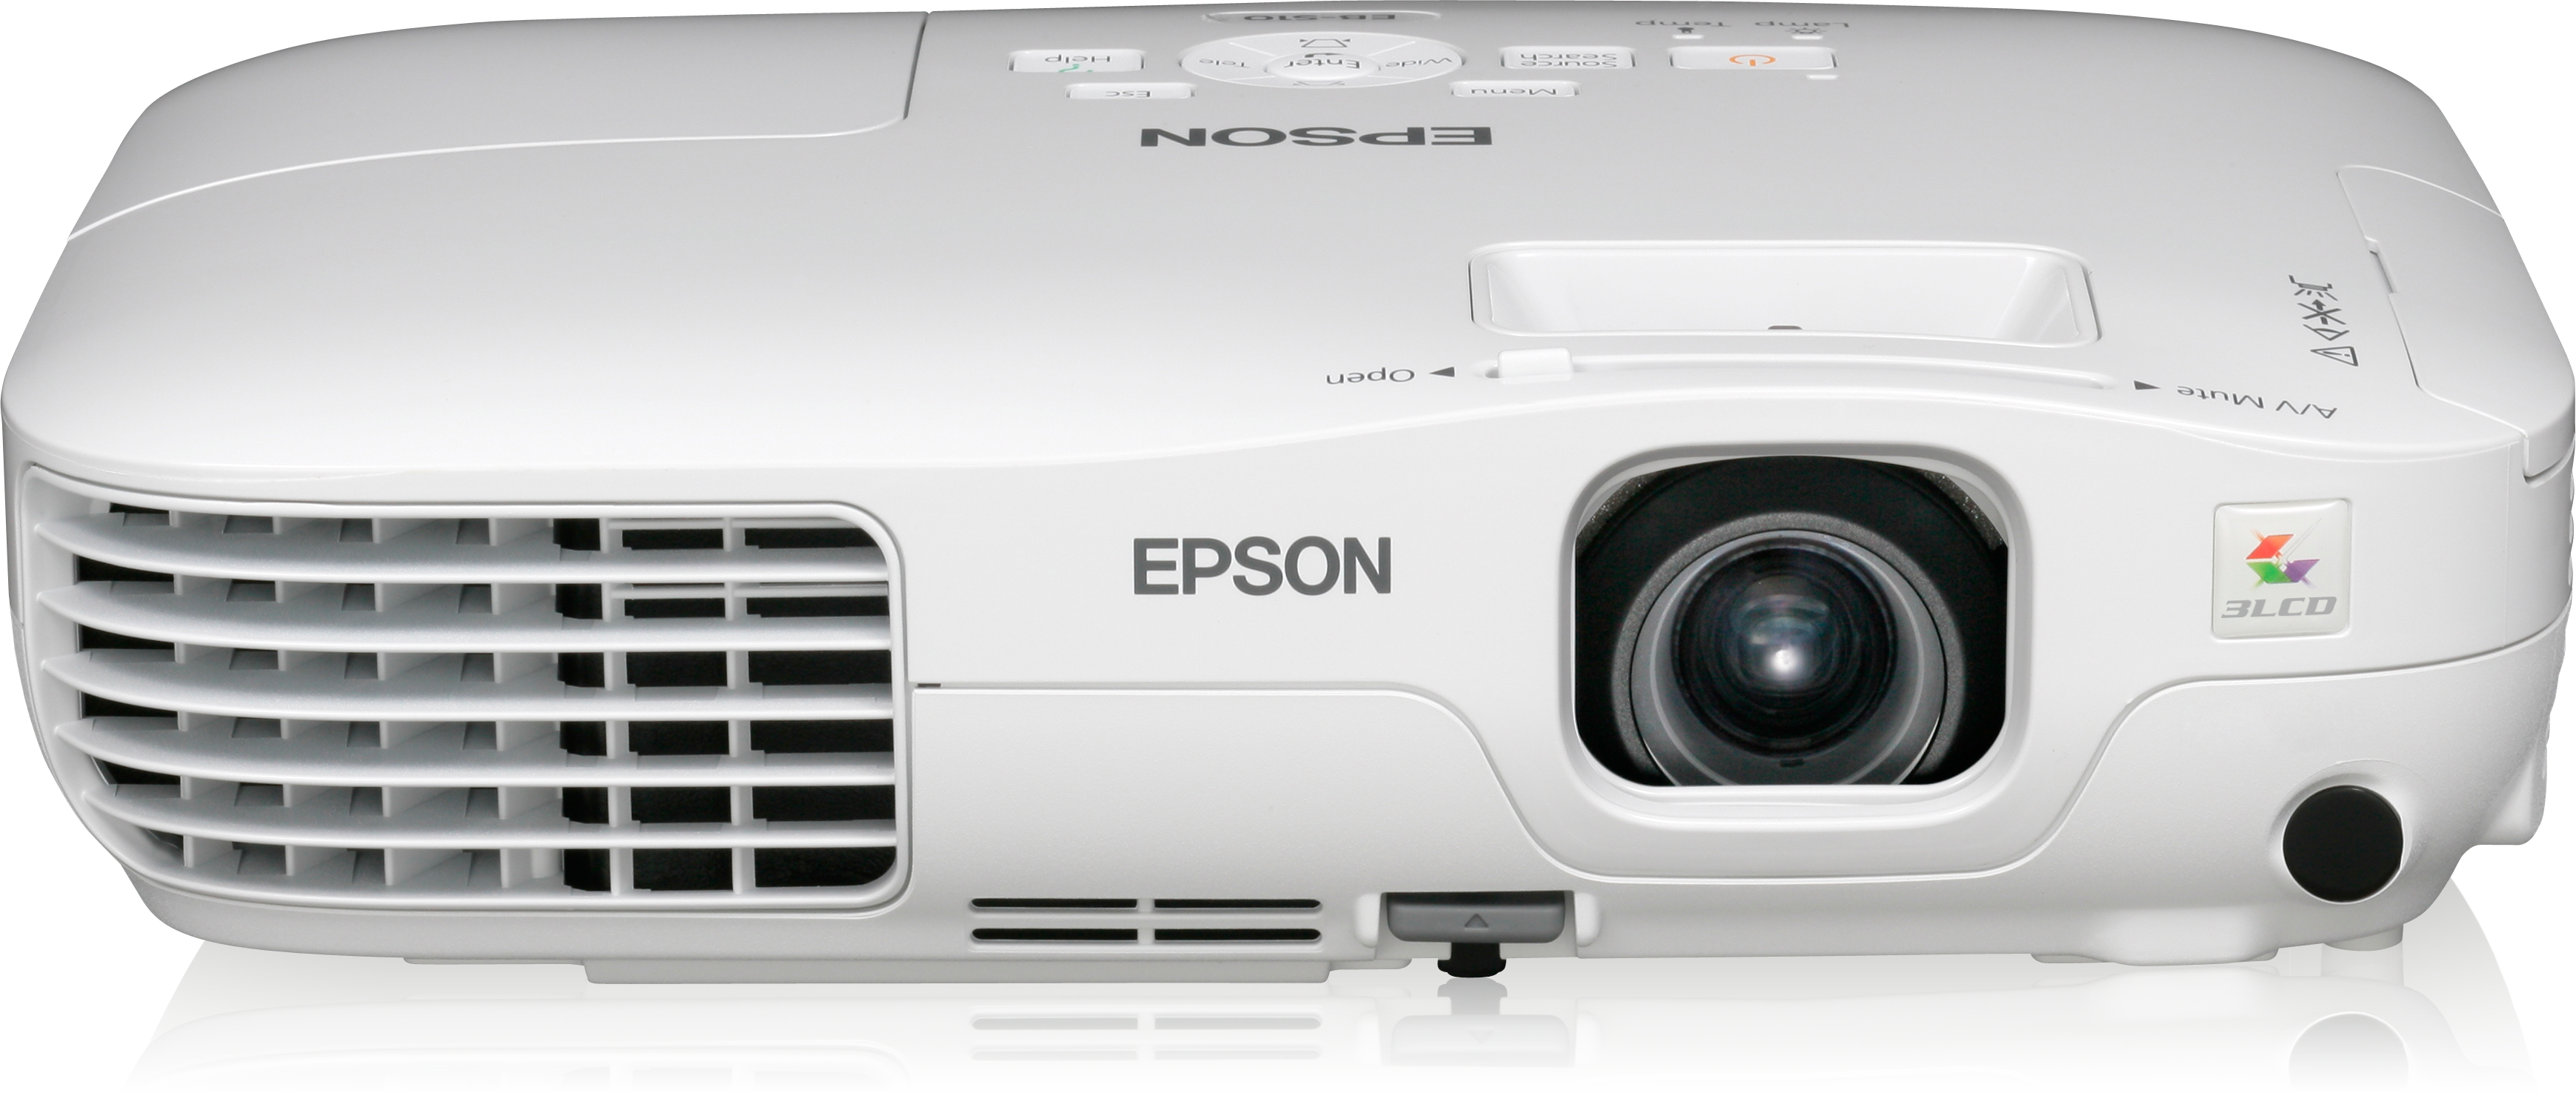 Epson EB-S10 | Mobile | Projectors | Products | Epson Europe